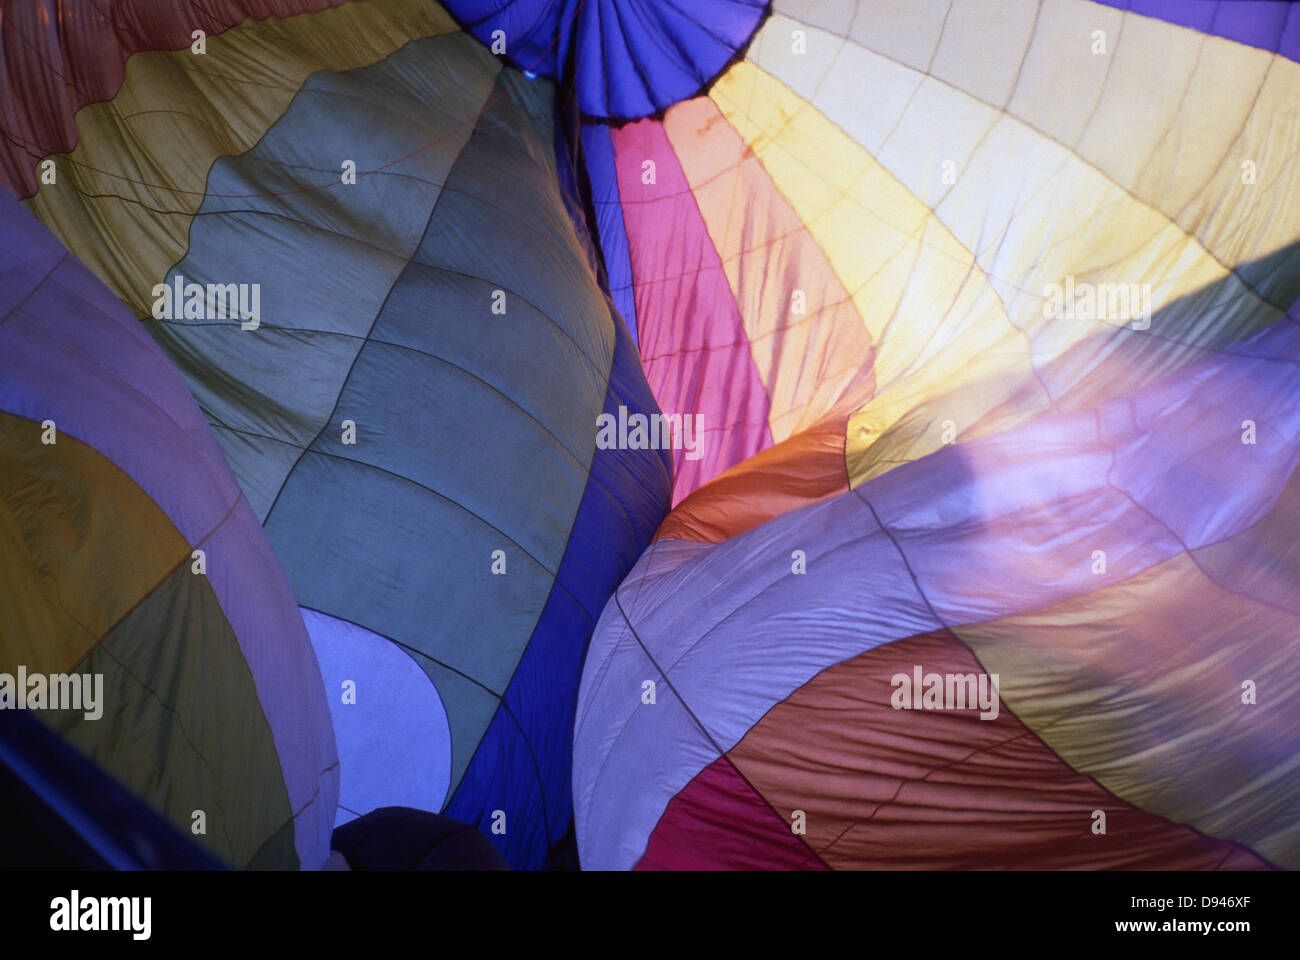 Air balloon fills with air, Sweden. Stock Photo